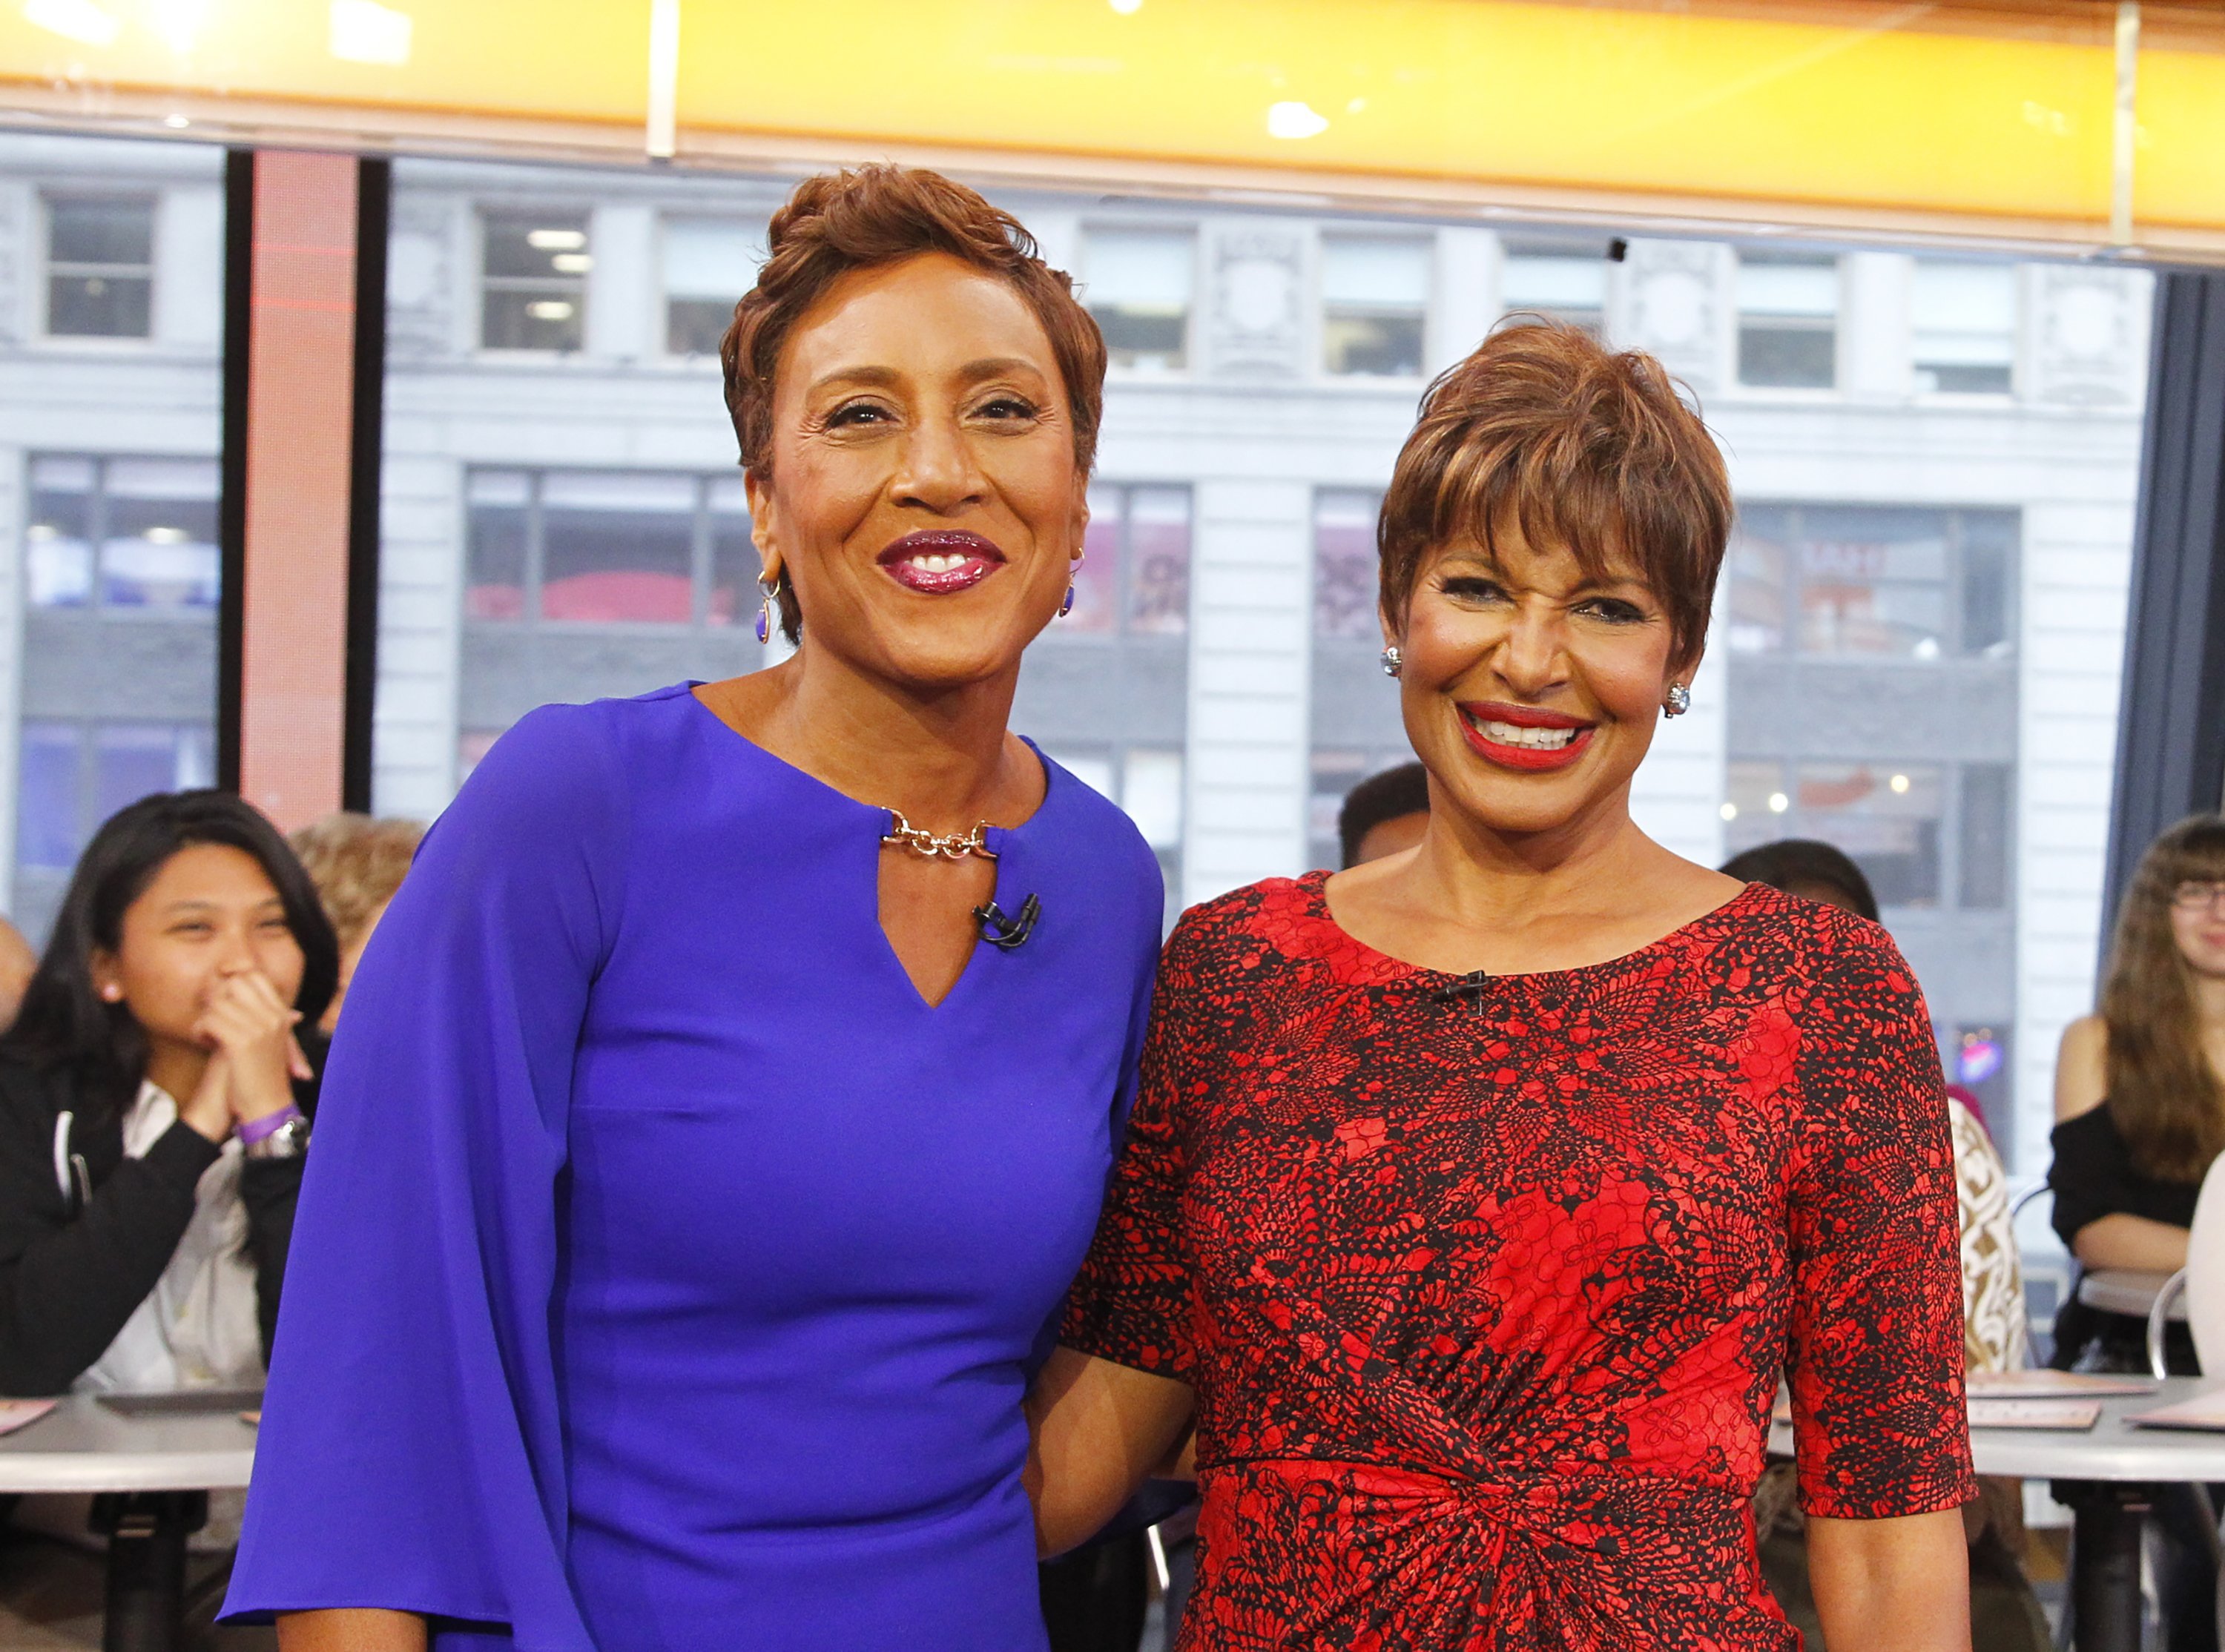 Robin Roberts celebrates her 5th birthday with sister Sally-Ann on "Good Morning America," September 20, 2017 | Photo: GettyImages